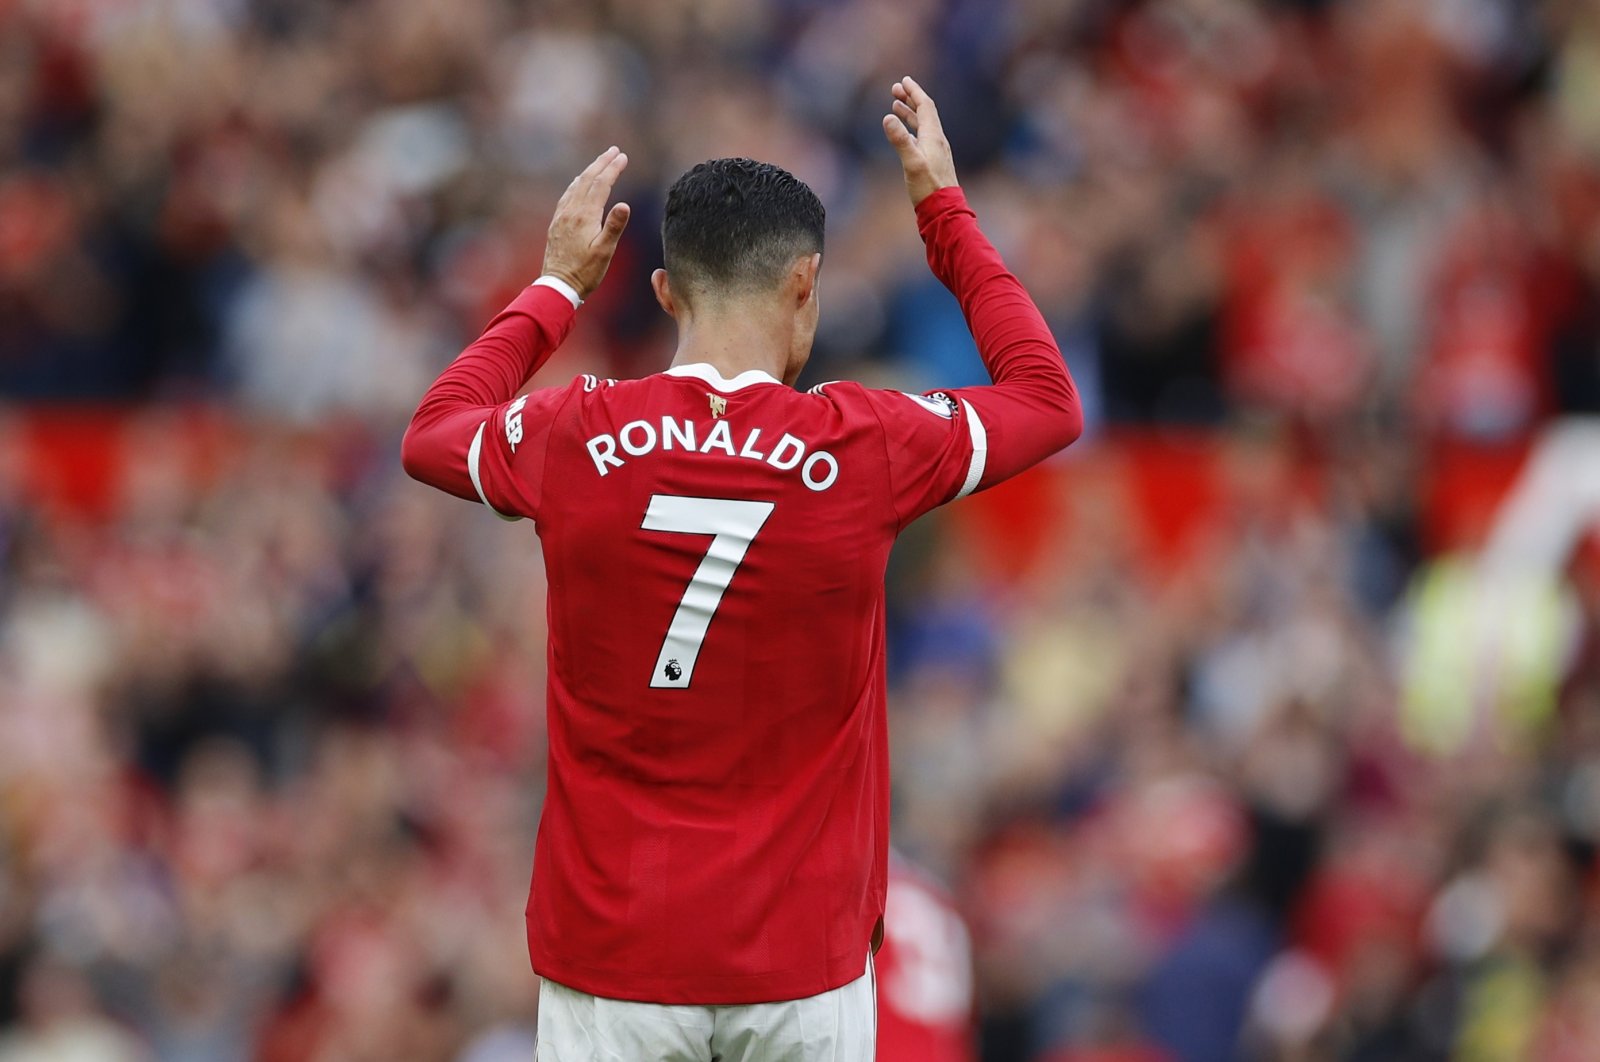 Manchester United's Cristiano Ronaldo reacts during a Premier League match against Newcastle United, Old Trafford, Manchester, Sept. 11, 2021. (Reuters Photo)